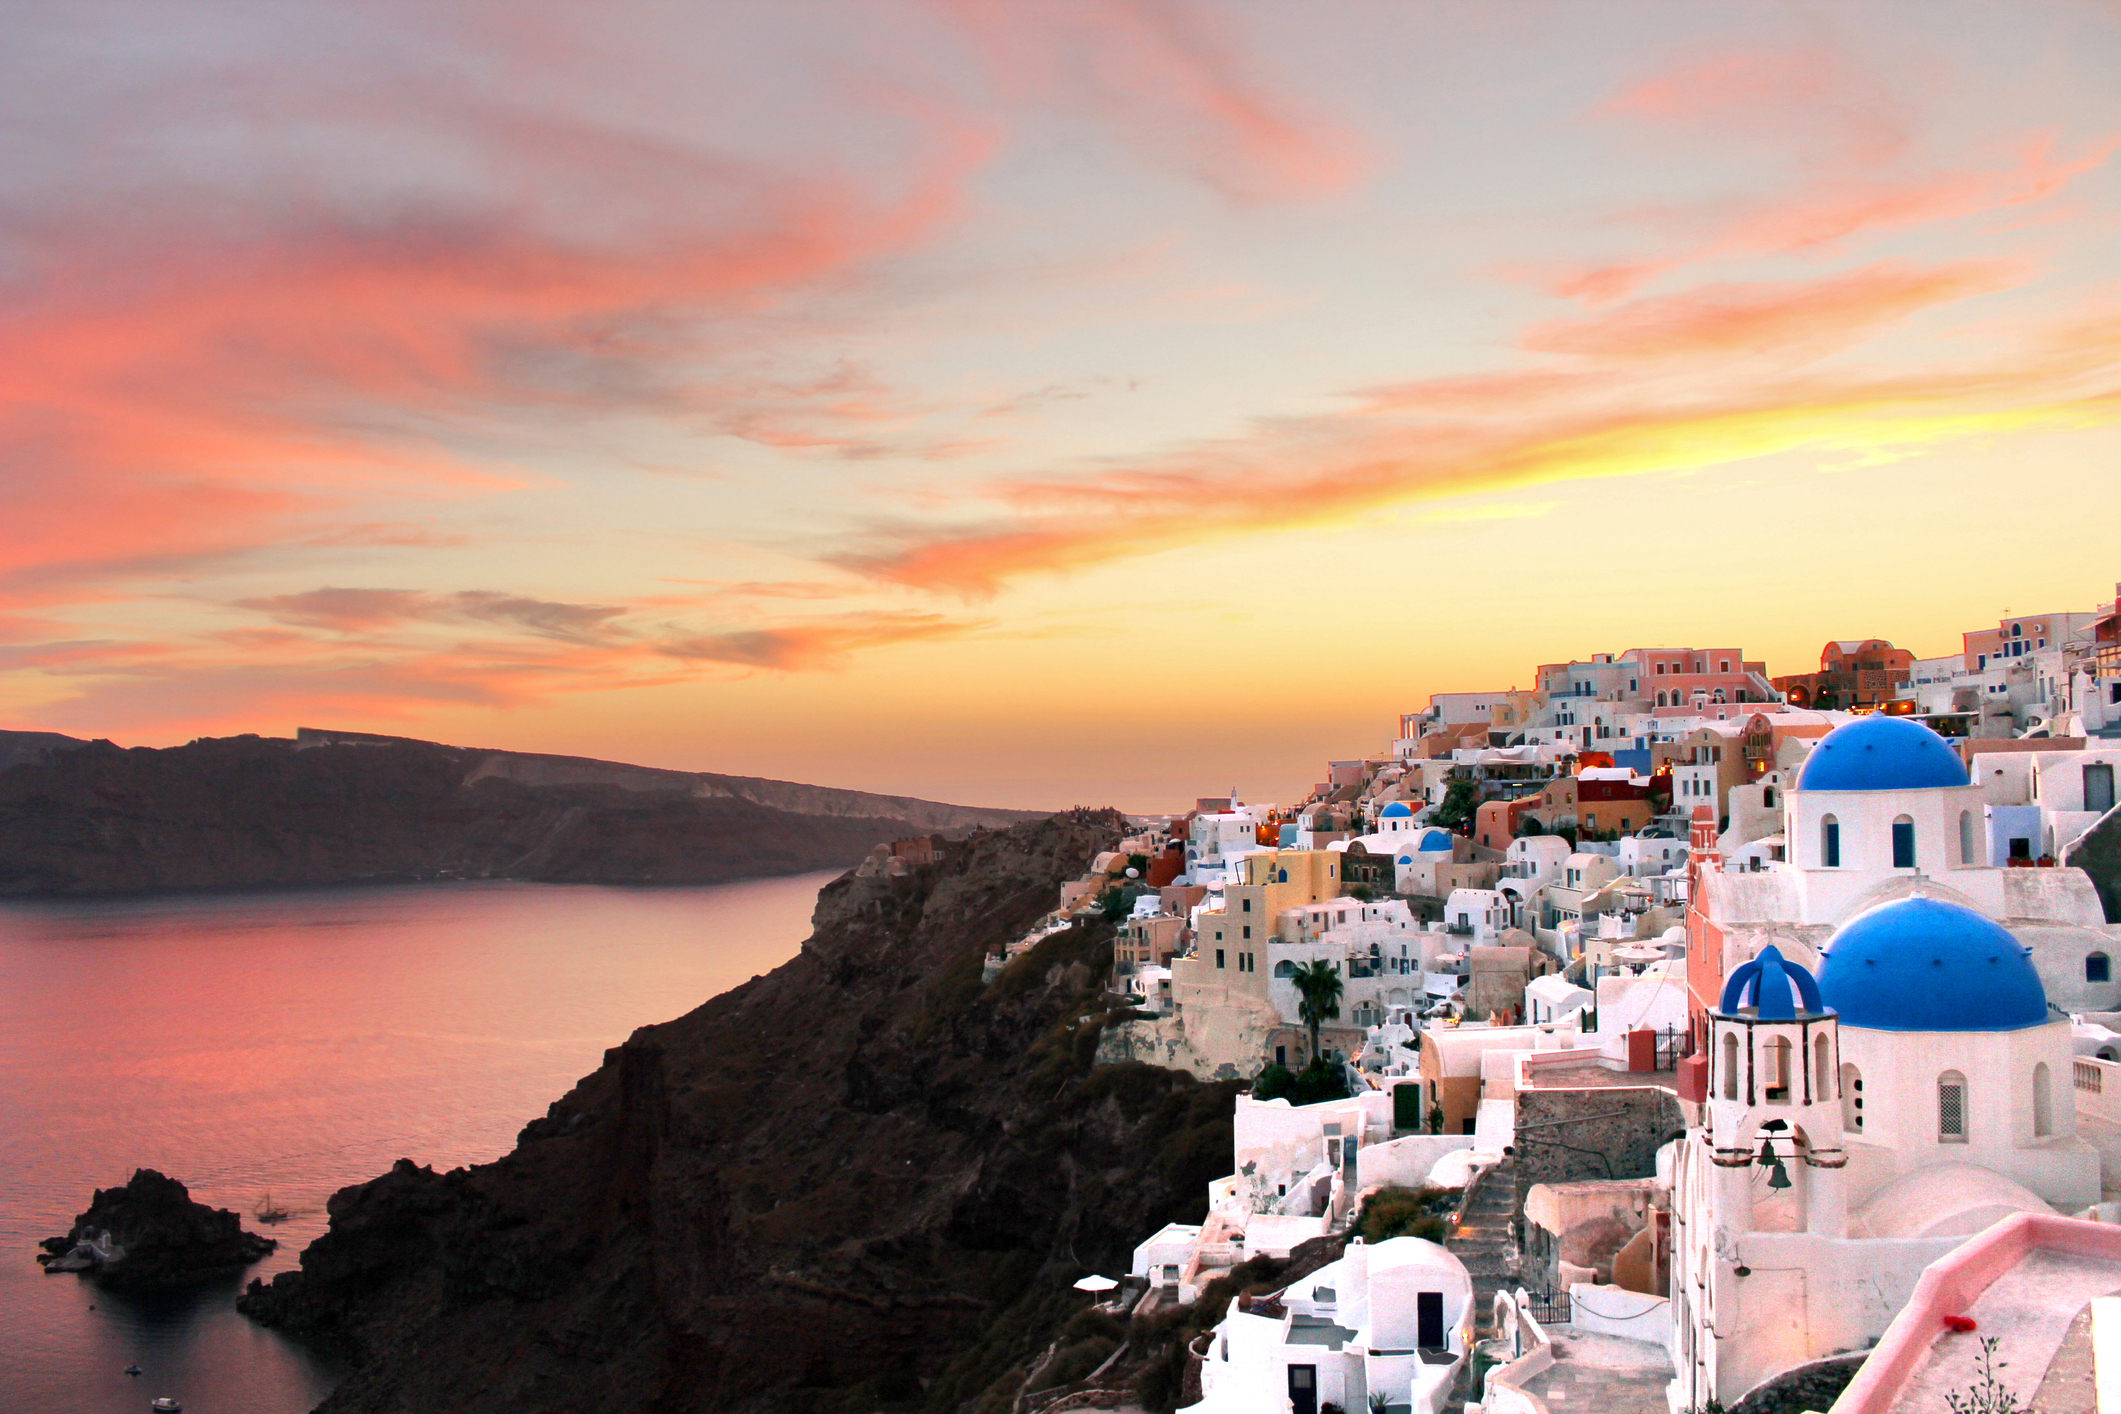 A landscape shot of one of the most famous sightseeing spots in Greece, right after the sunset. You can see the traditional whitewashed houses and the beautiful colors of the sunset at this special location.